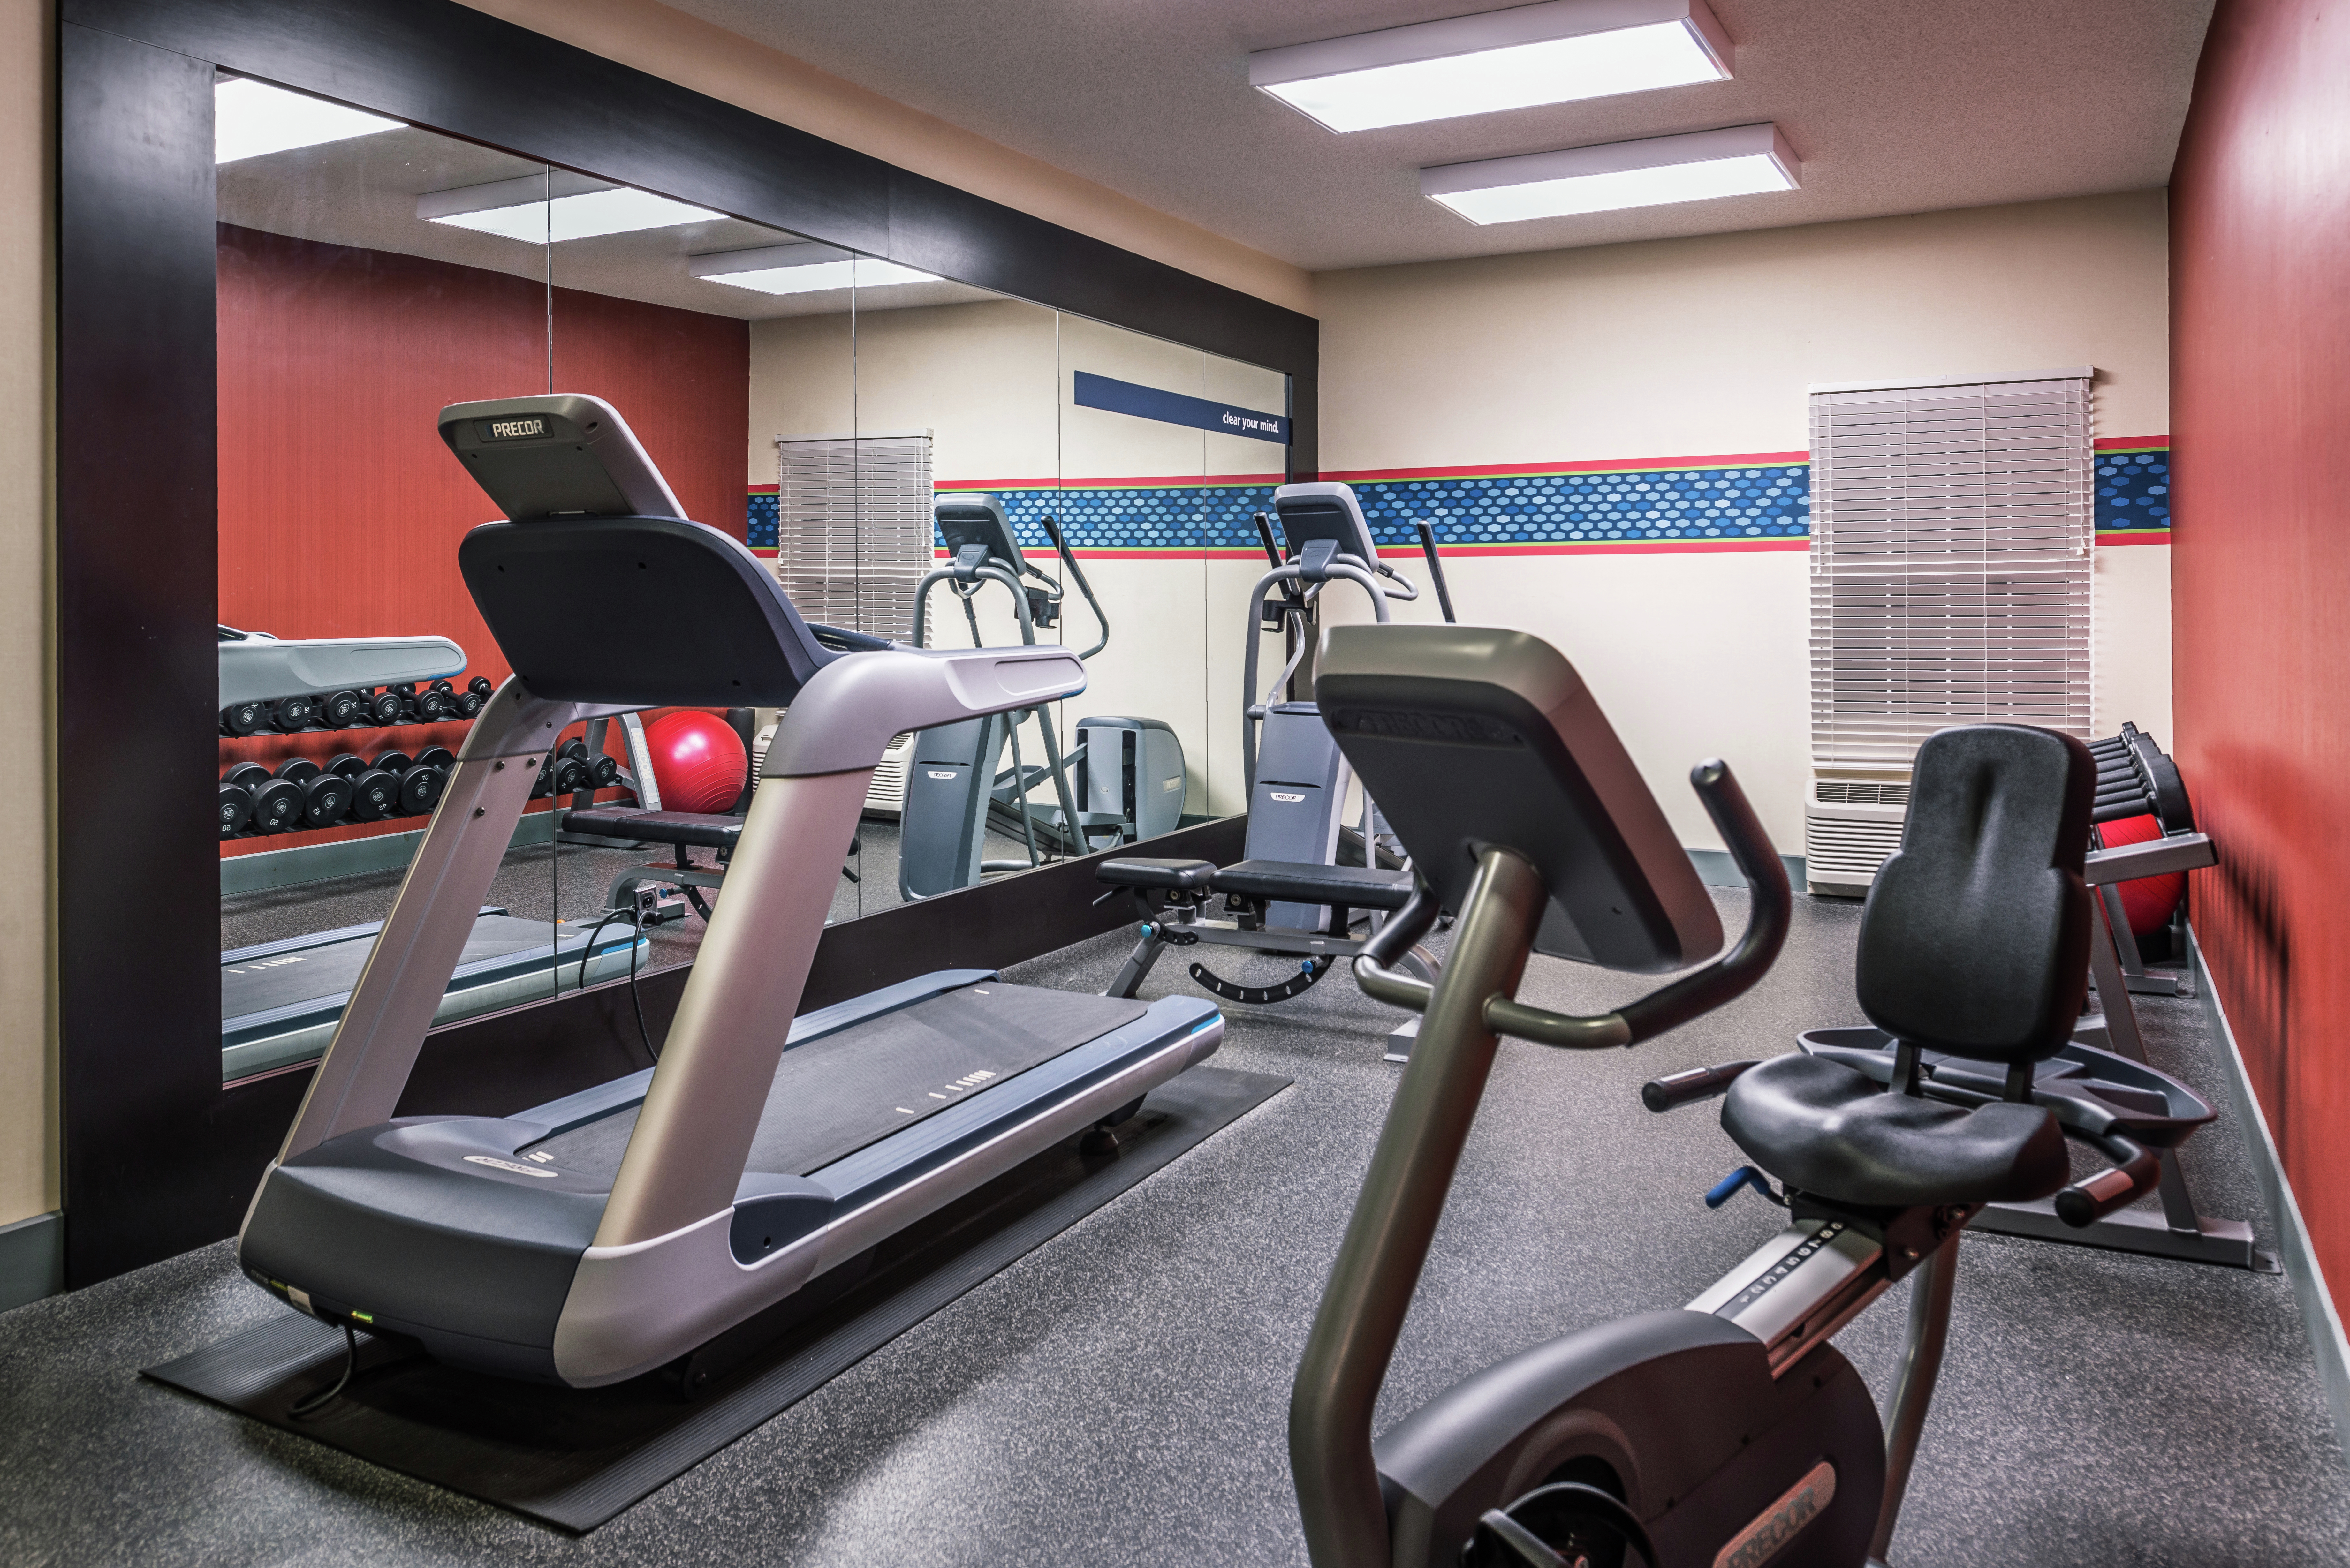 Fitness room with weights and treadmills